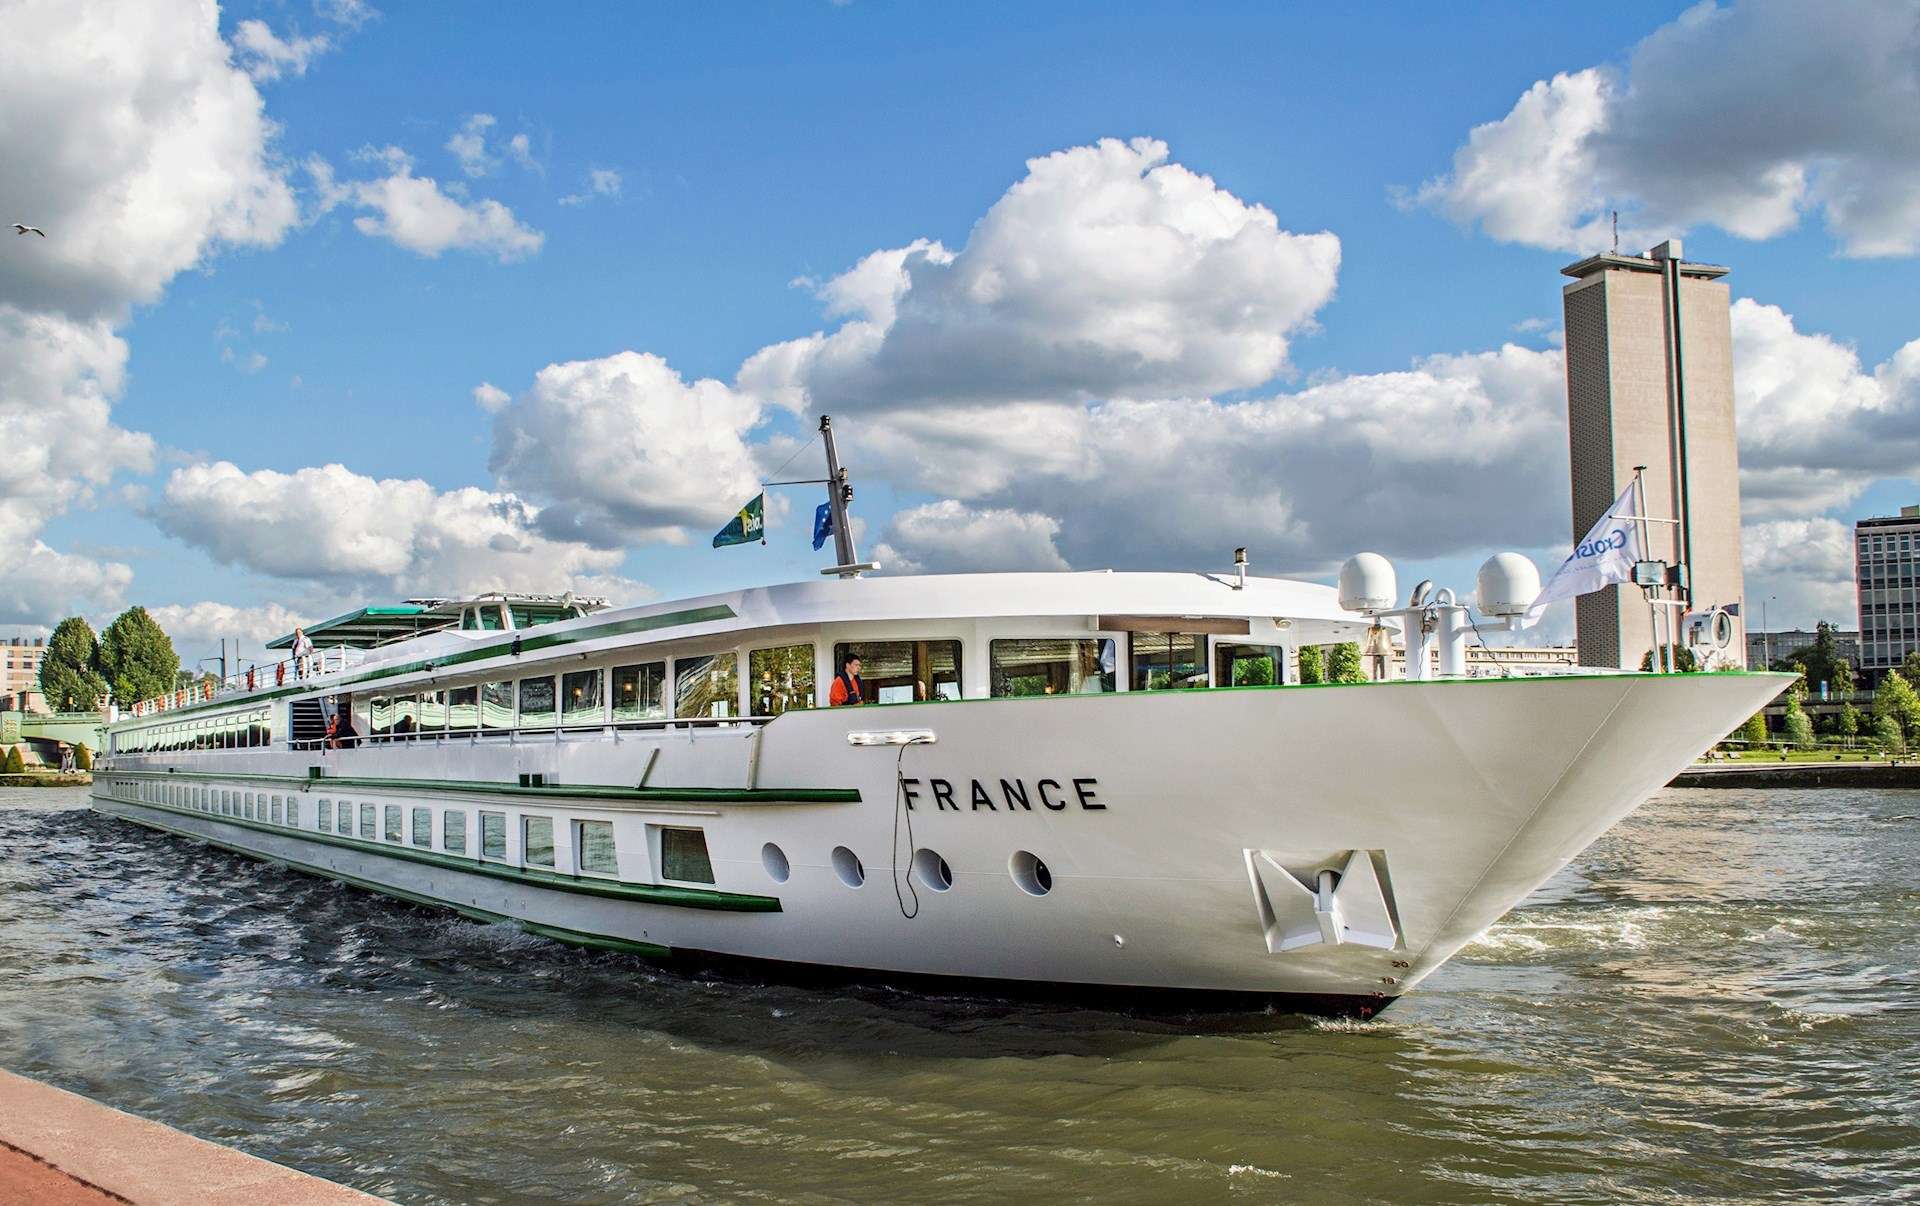 CroisiEurope MS France River Cruise Ship 2021 / 2022